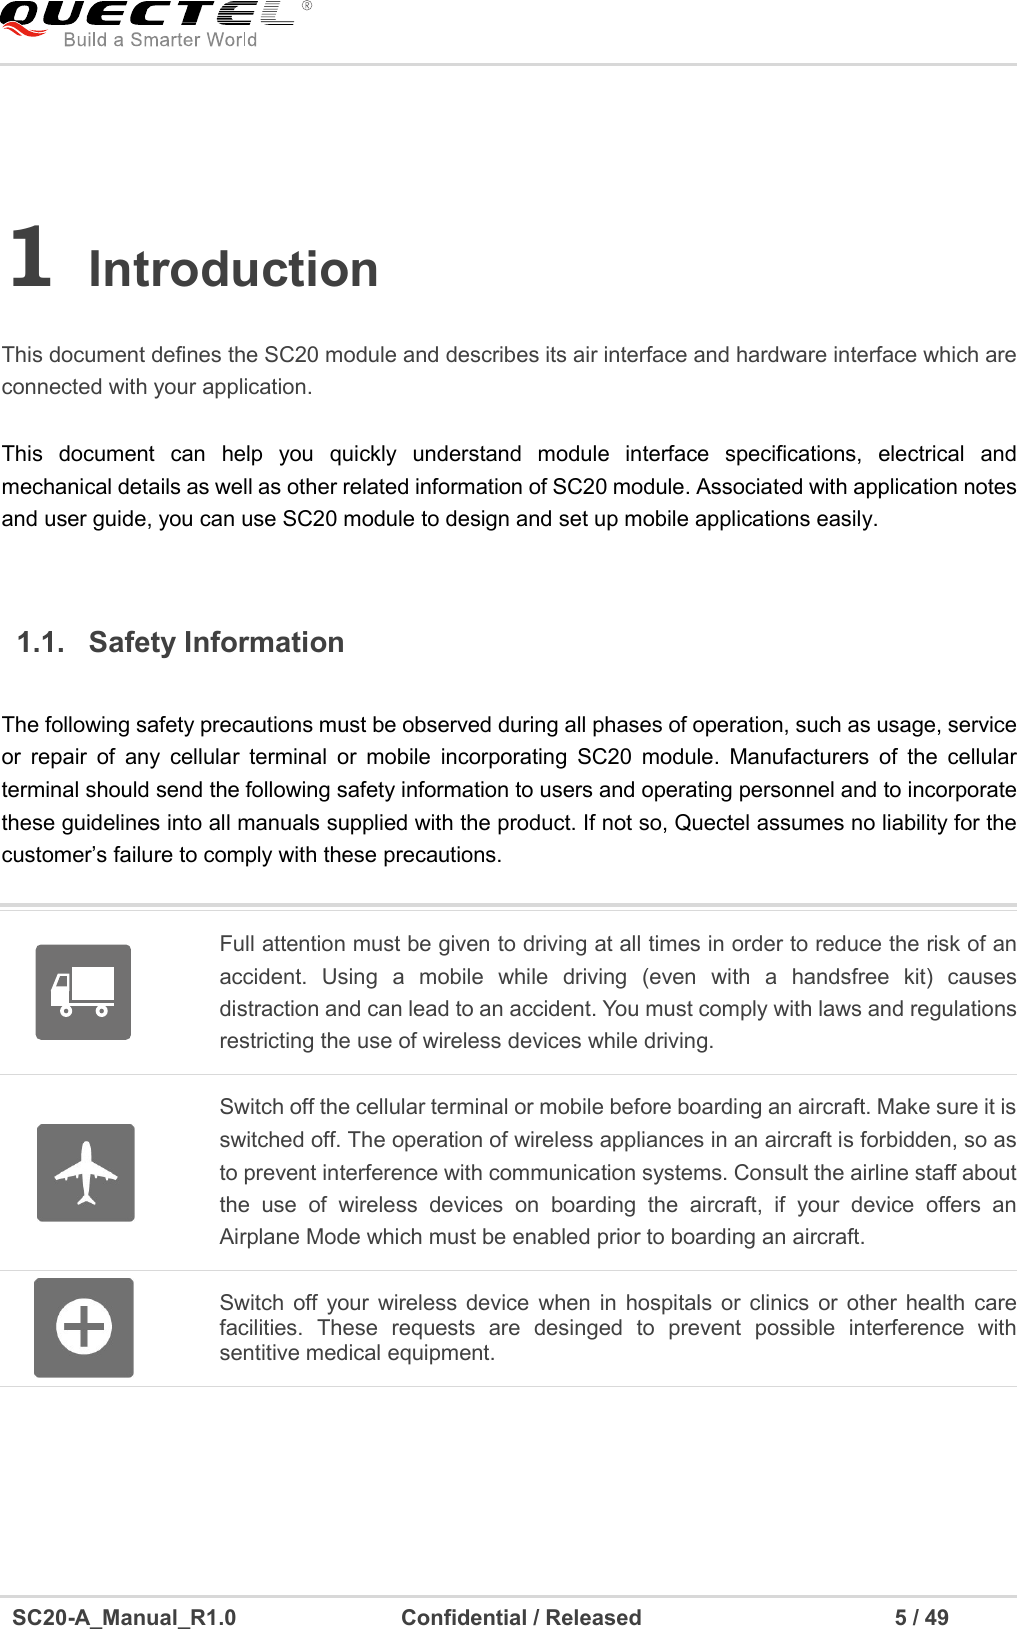     SC20-A_Manual_R1.0                              Confidential / Released                                              5 / 49    1 Introduction    This document defines the SC20 module and describes its air interface and hardware interface which are connected with your application.  1.1.  Safety Information    Full attention must be given to driving at all times in order to reduce the risk of an accident.  Using  a  mobile  while  driving  (even  with  a  handsfree  kit)  causes distraction and can lead to an accident. You must comply with laws and regulations restricting the use of wireless devices while driving.    Switch off the cellular terminal or mobile before boarding an aircraft. Make sure it is switched off. The operation of wireless appliances in an aircraft is forbidden, so as to prevent interference with communication systems. Consult the airline staff about the  use  of  wireless  devices  on  boarding  the  aircraft,  if  your  device  offers  an Airplane Mode which must be enabled prior to boarding an aircraft.  Switch  off  your wireless device  when  in hospitals or  clinics  or other  health  care facilities.  These  requests  are  desinged  to  prevent  possible  interference  with sentitive medical equipment.   This  document  can  help  you  quickly  understand  module  interface  specifications,  electrical  and mechanical details as well as other related information of SC20 module. Associated with application notes and user guide, you can use SC20 module to design and set up mobile applications easily.  The following safety precautions must be observed during all phases of operation, such as usage, service or  repair  of  any  cellular  terminal  or  mobile  incorporating  SC20  module.  Manufacturers  of  the  cellular terminal should send the following safety information to users and operating personnel and to incorporate these guidelines into all manuals supplied with the product. If not so, Quectel assumes no liability for the customer’s failure to comply with these precautions. 